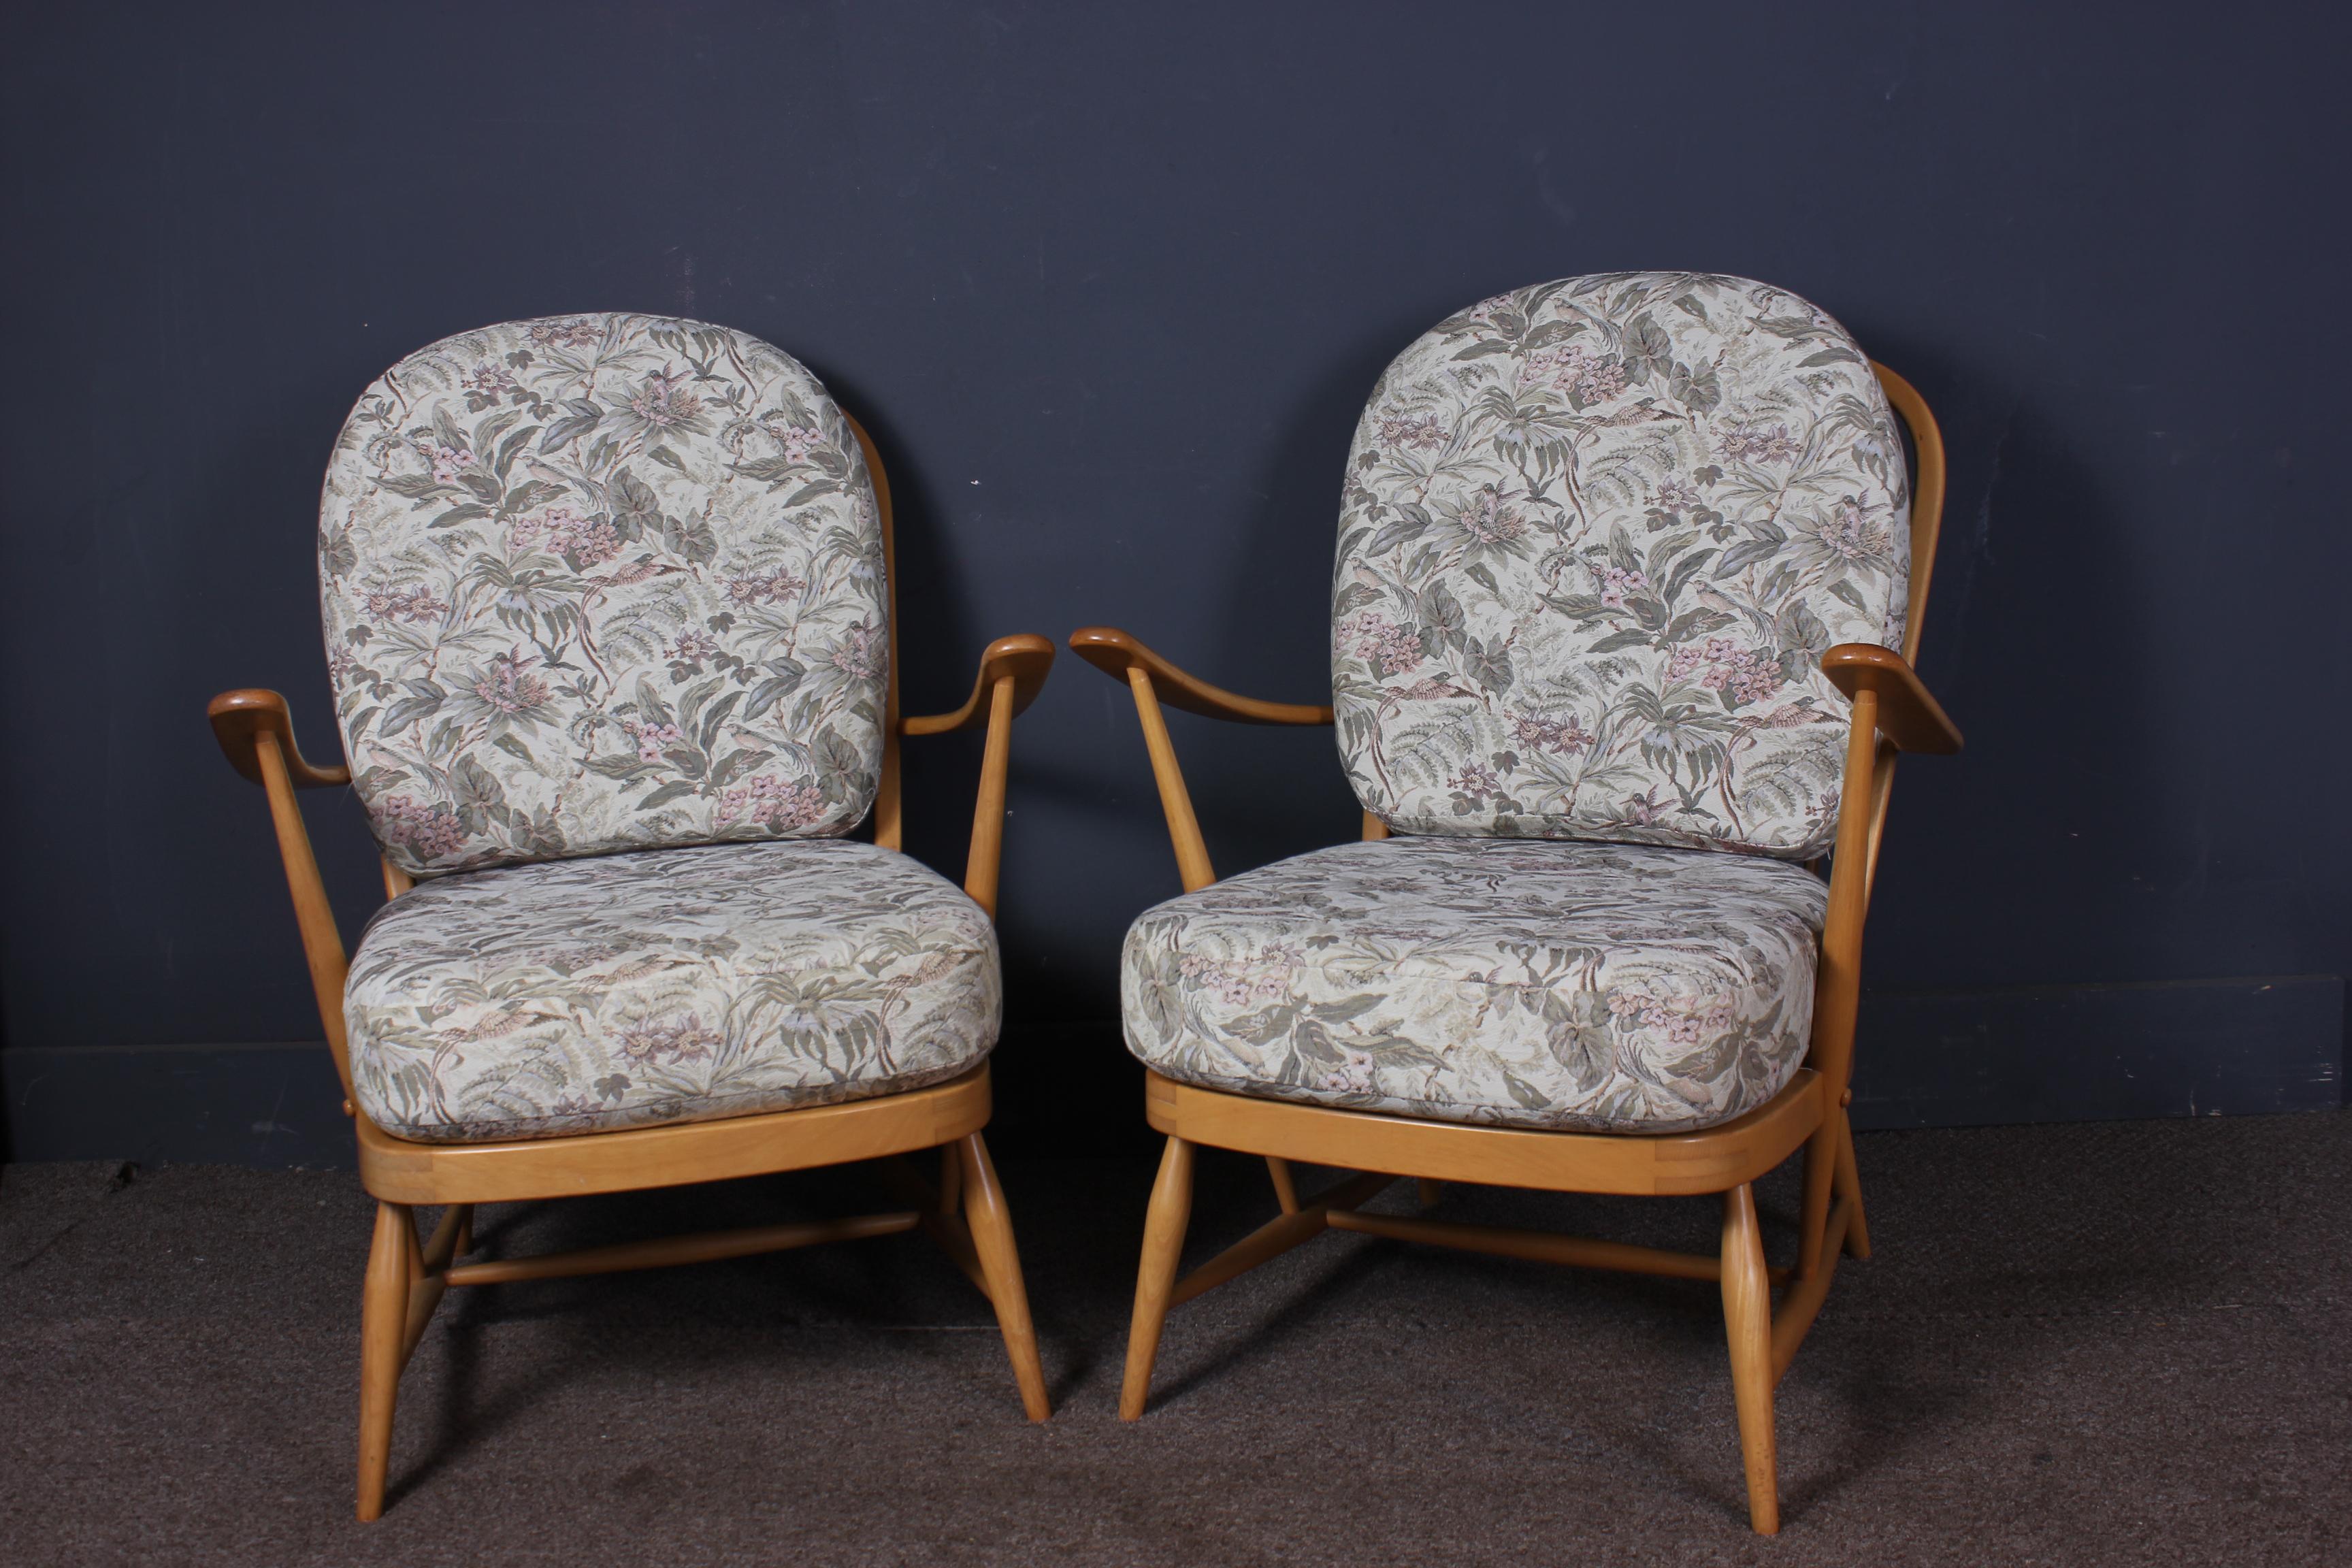 A pair of beautiful blonde Ercol 203 armchairs. These classic chairs have floral pattern fabric cushions and are in beautiful condition with the fabric being very clean with no rips or tears also the webbing is in as new condition on both chairs.
